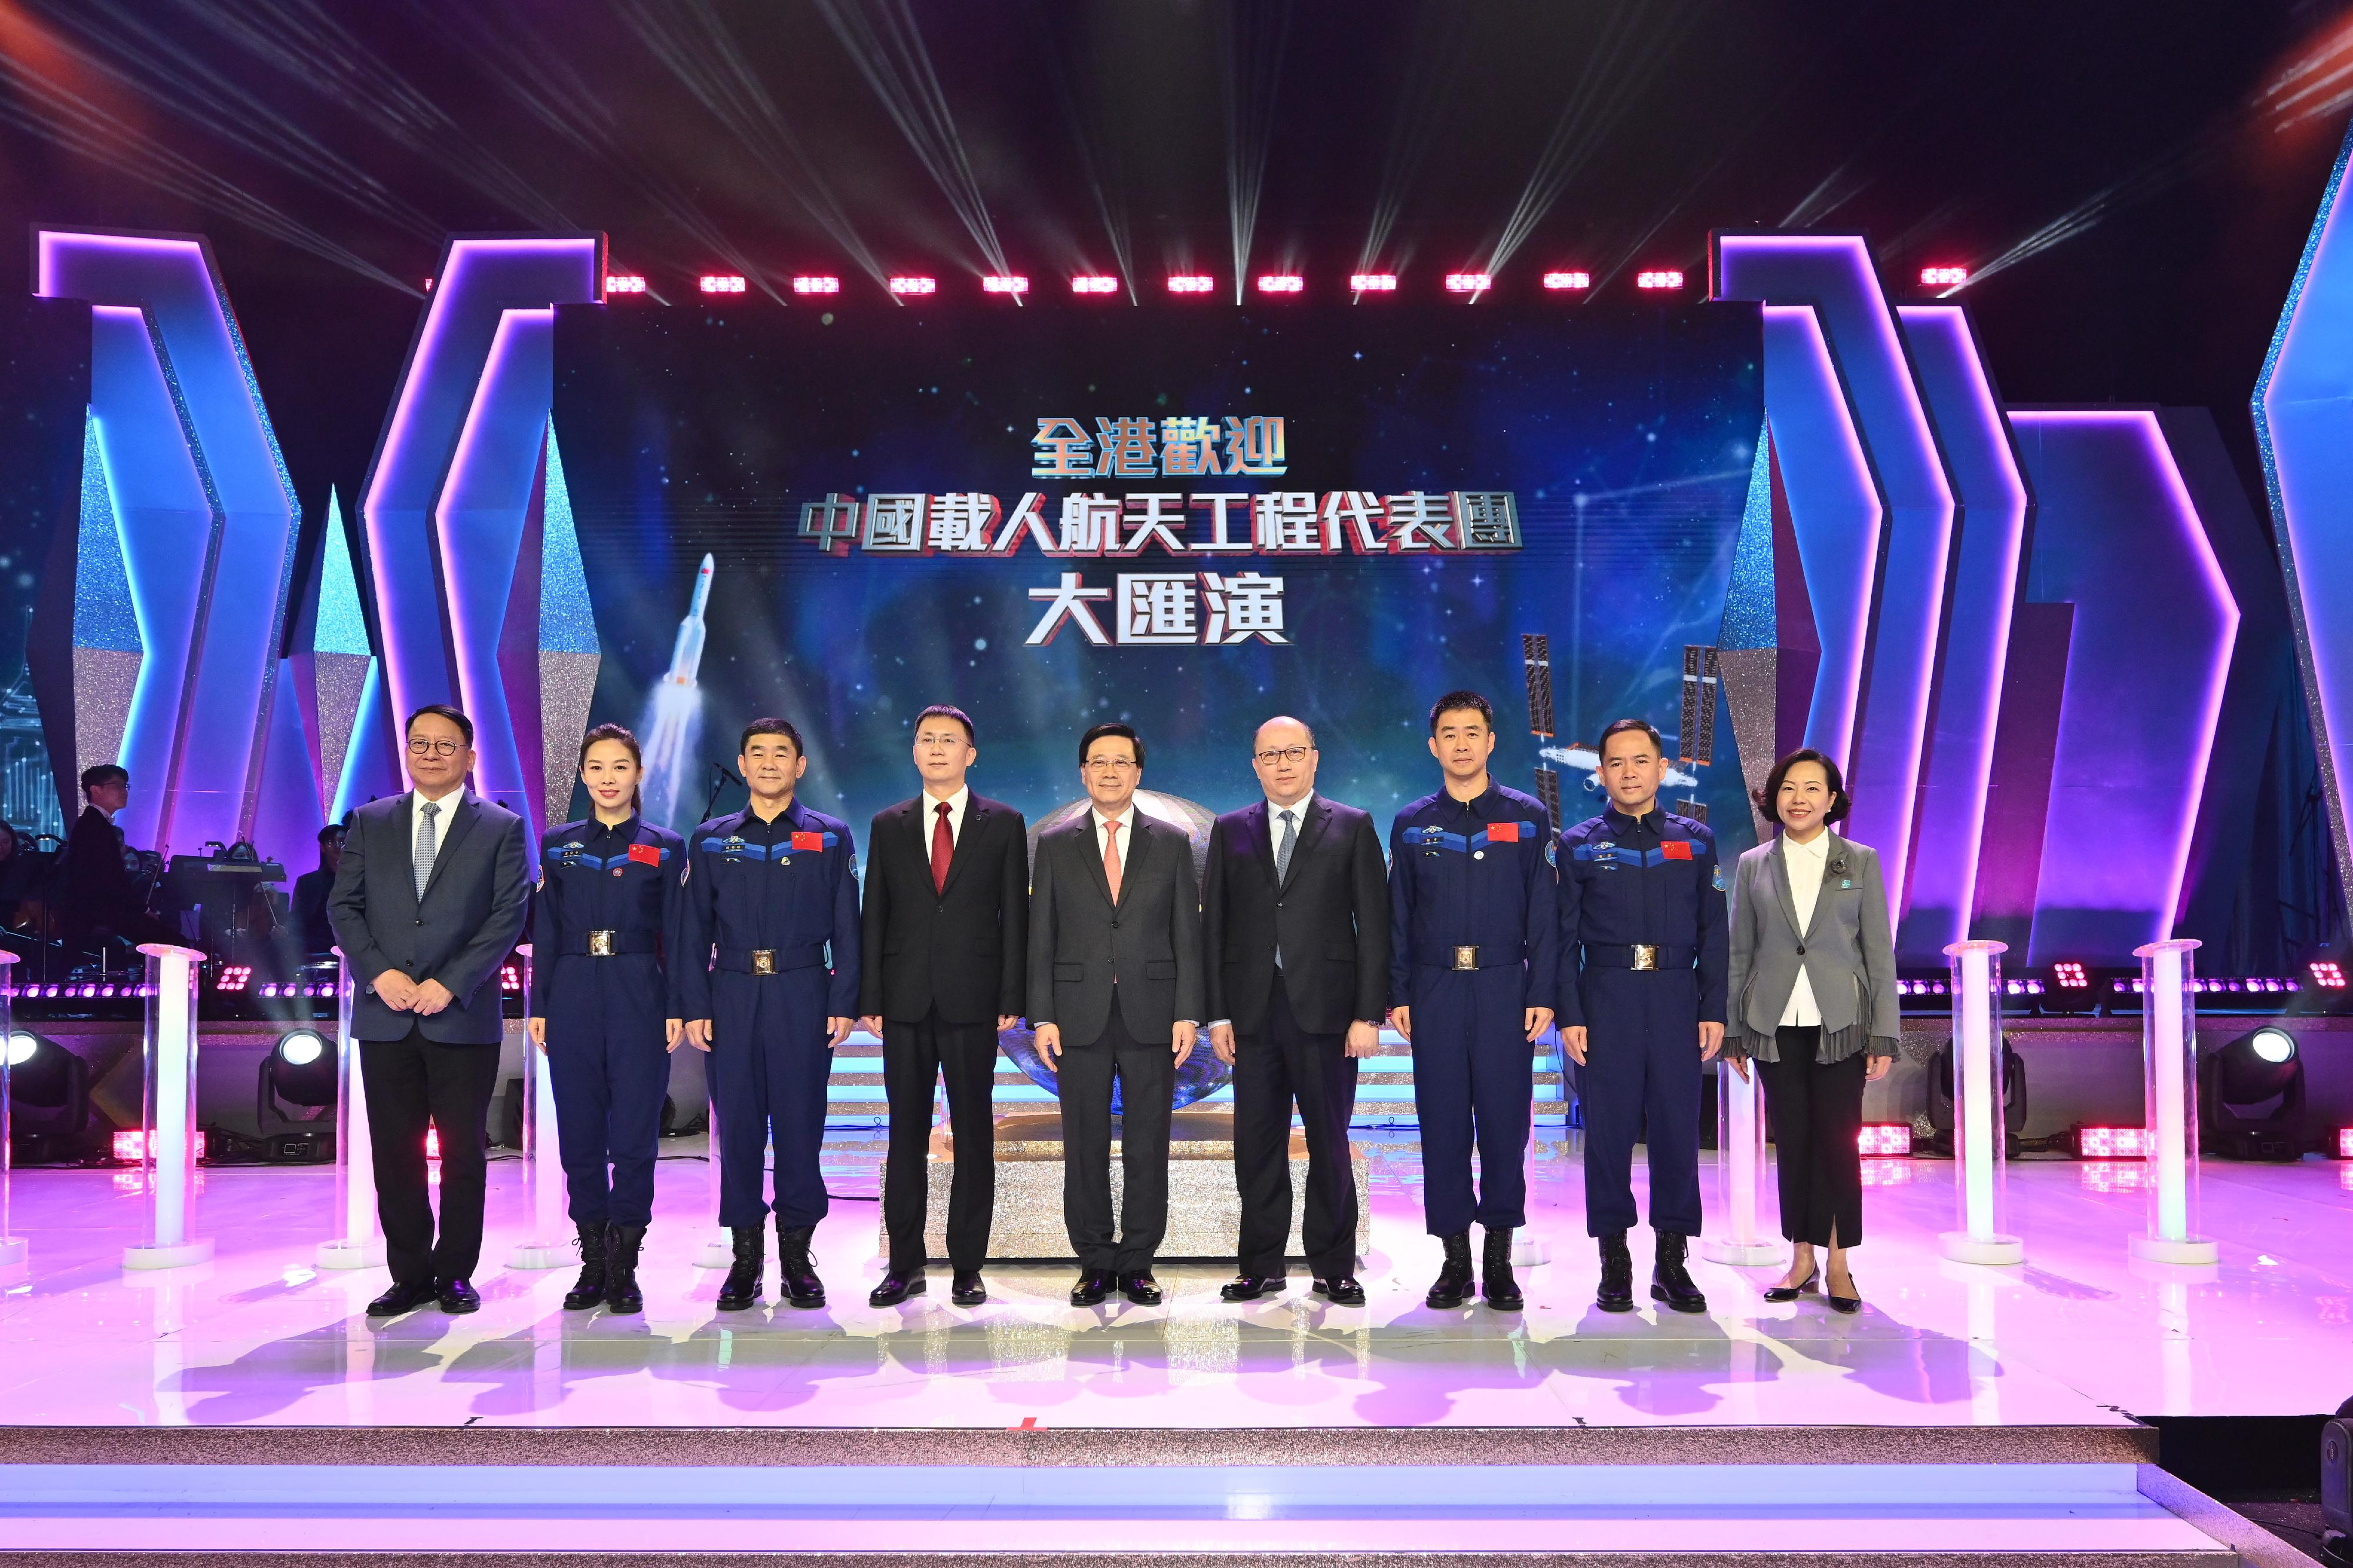 The China Manned Space delegation continued their visit to Hong Kong today (November 29) and attended the variety show that marked Hong Kong's welcoming of the China Manned Space delegation at the Hong Kong Coliseum. Photo shows (from left) the Chief Secretary for Administration, Mr Chan Kwok-ki; Shenzhou-13 astronaut Ms Wang Yaping; Shenzhou-12 astronaut Mr Liu Boming; the leader of the delegation and Deputy Director General of the China Manned Space Agency, Mr Lin Xiqiang; the Chief Executive, Mr John Lee; the Director of the Liaison Office of the Central People's Government in the Hong Kong Special Administrative Region, Mr Zheng Yanxiong; Shenzhou-14 mission commander Mr Chen Dong; Shenzhou-15 astronaut Mr Zhang Lu; and the Secretary for Home and Youth Affairs, Miss Alice Mak, at the variety show.